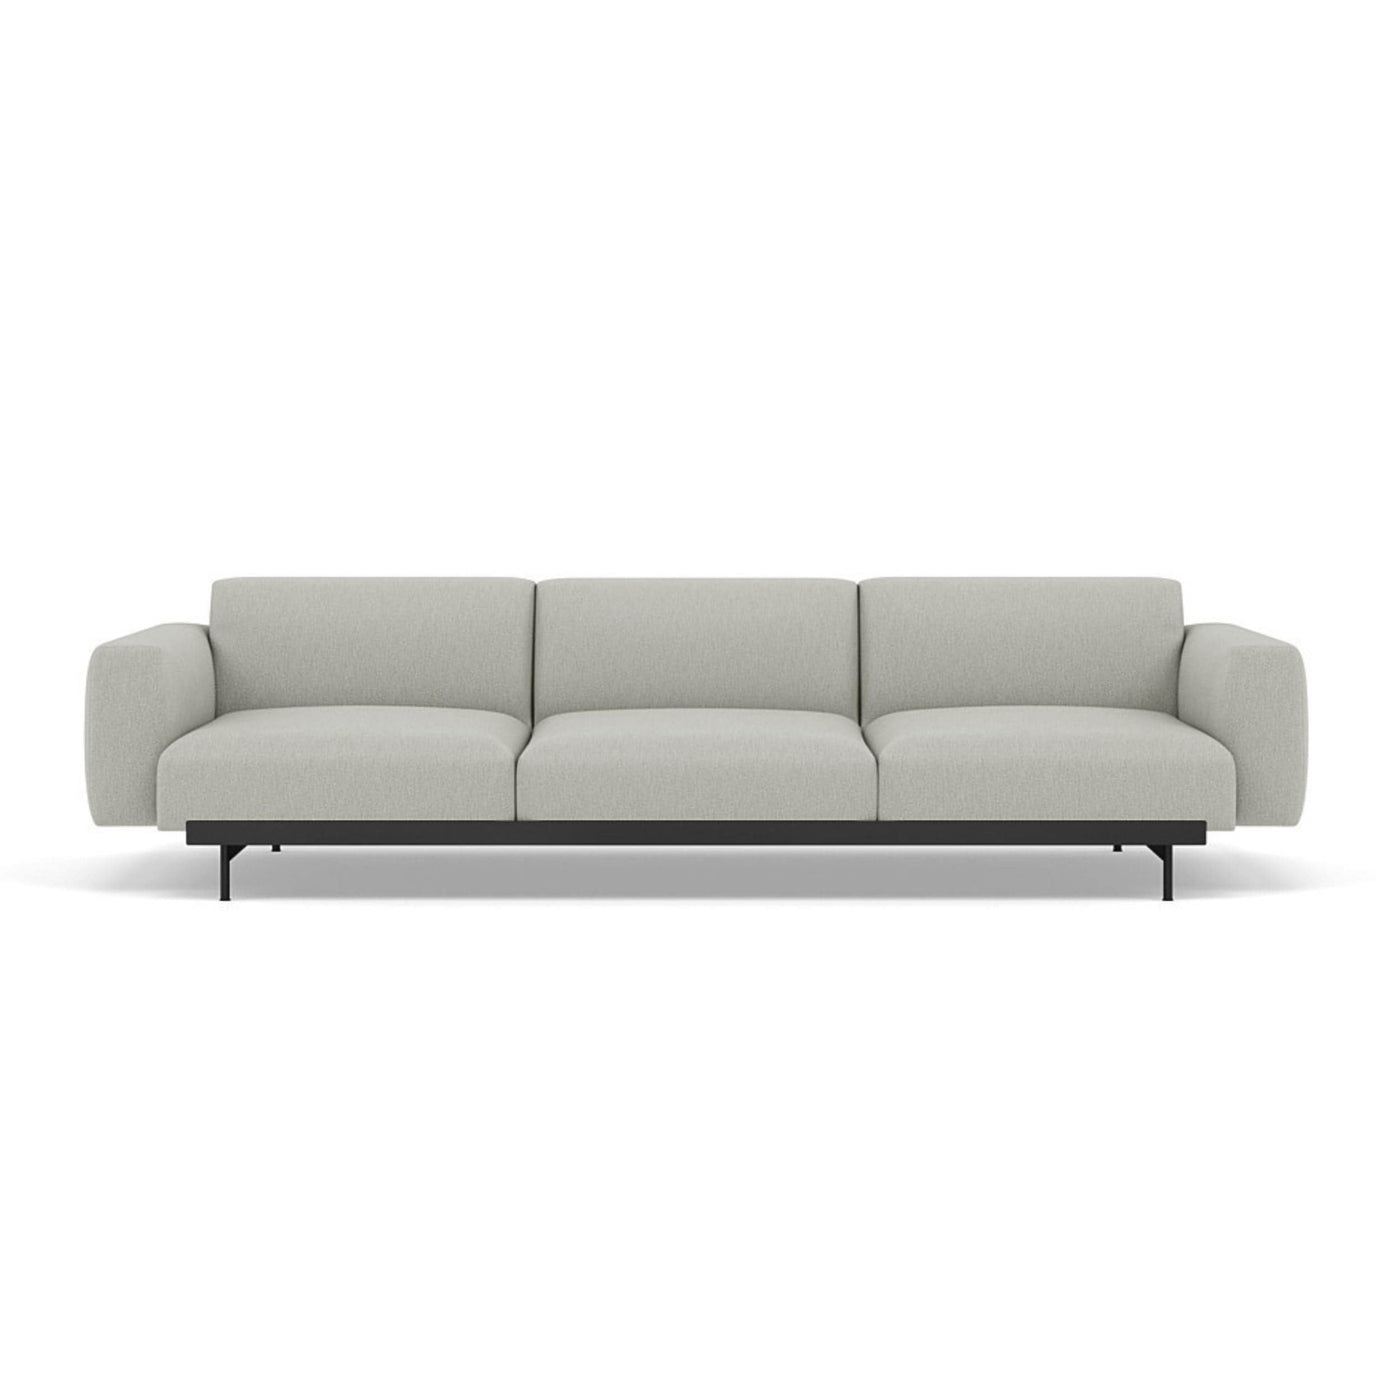 Muuto In Situ Sofa 3 seater configuration 1 in clay 12 fabric. Made to order at someday designs. #colour_clay-12